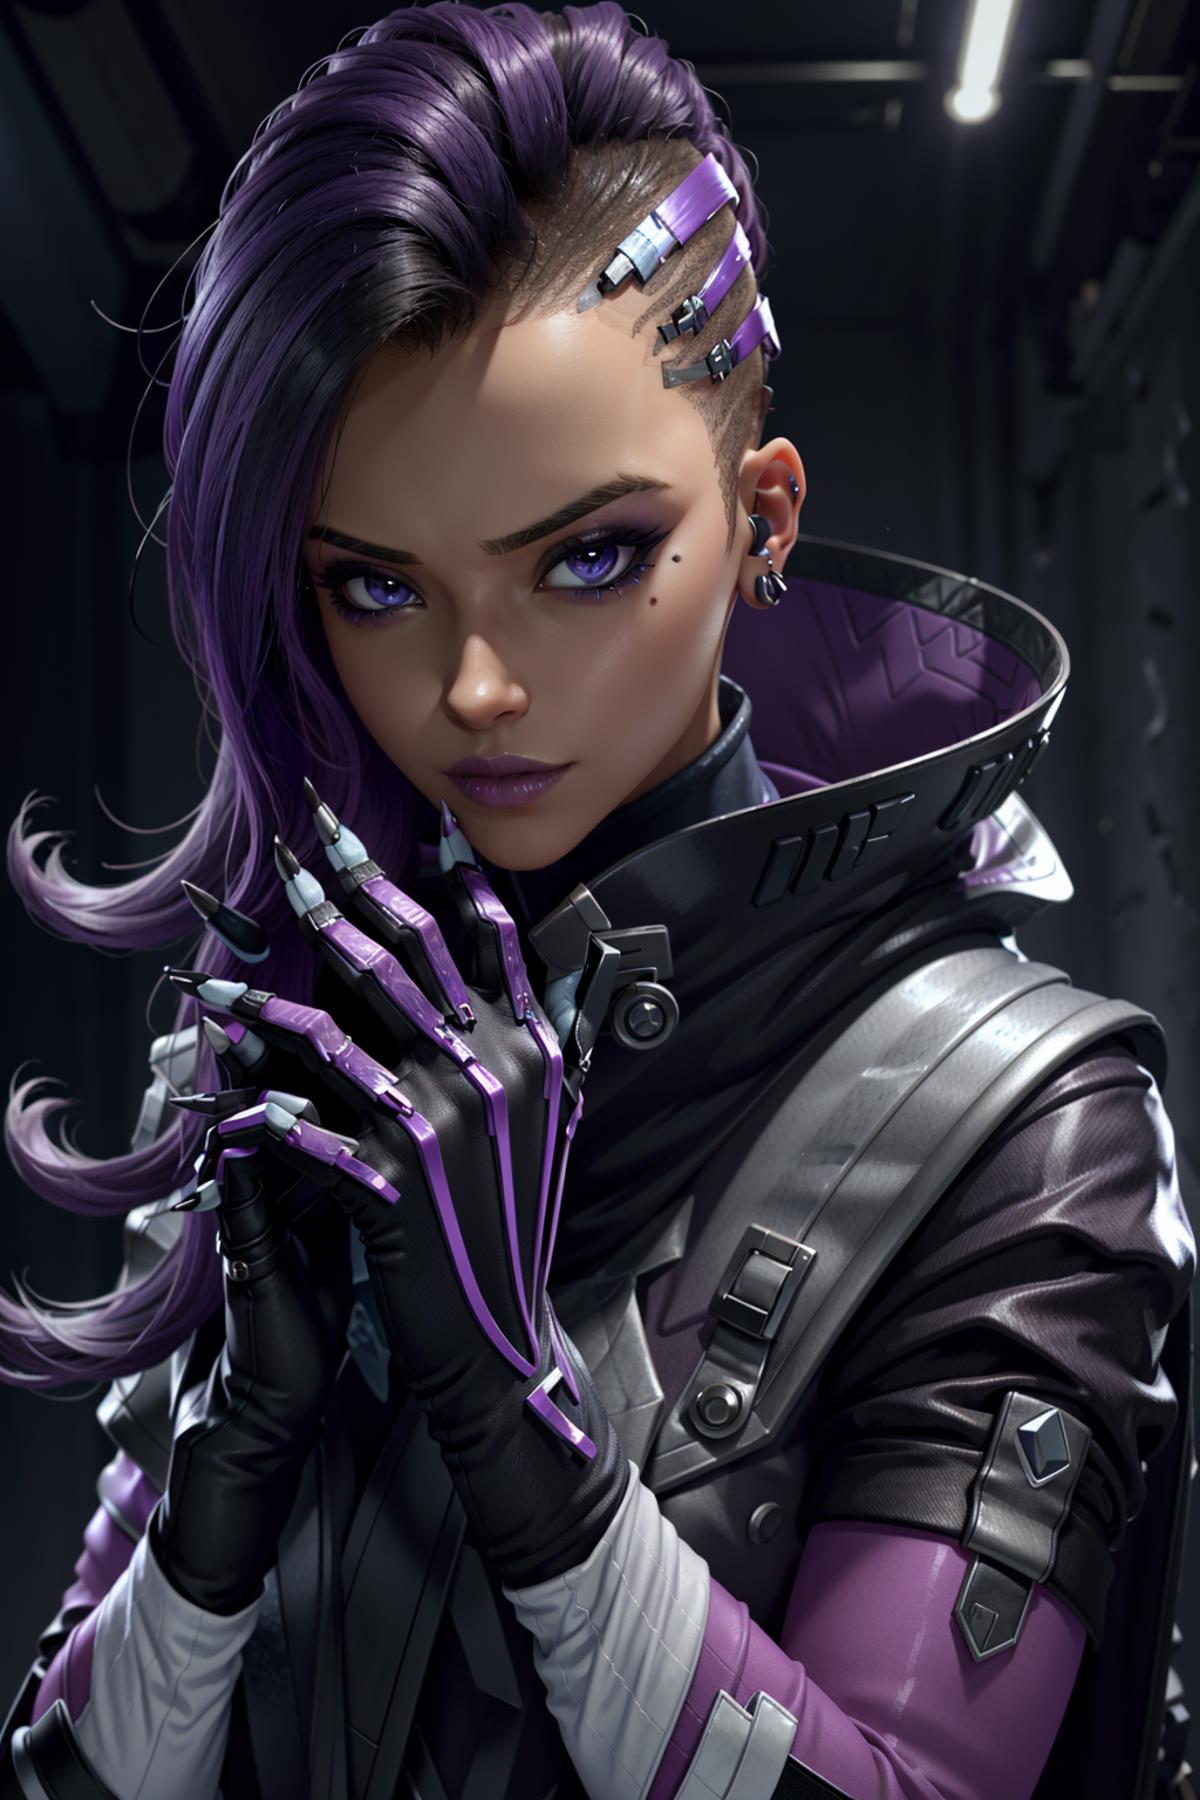 Not so Perfect - Sombra from Overwatch image by BloodRedKittie